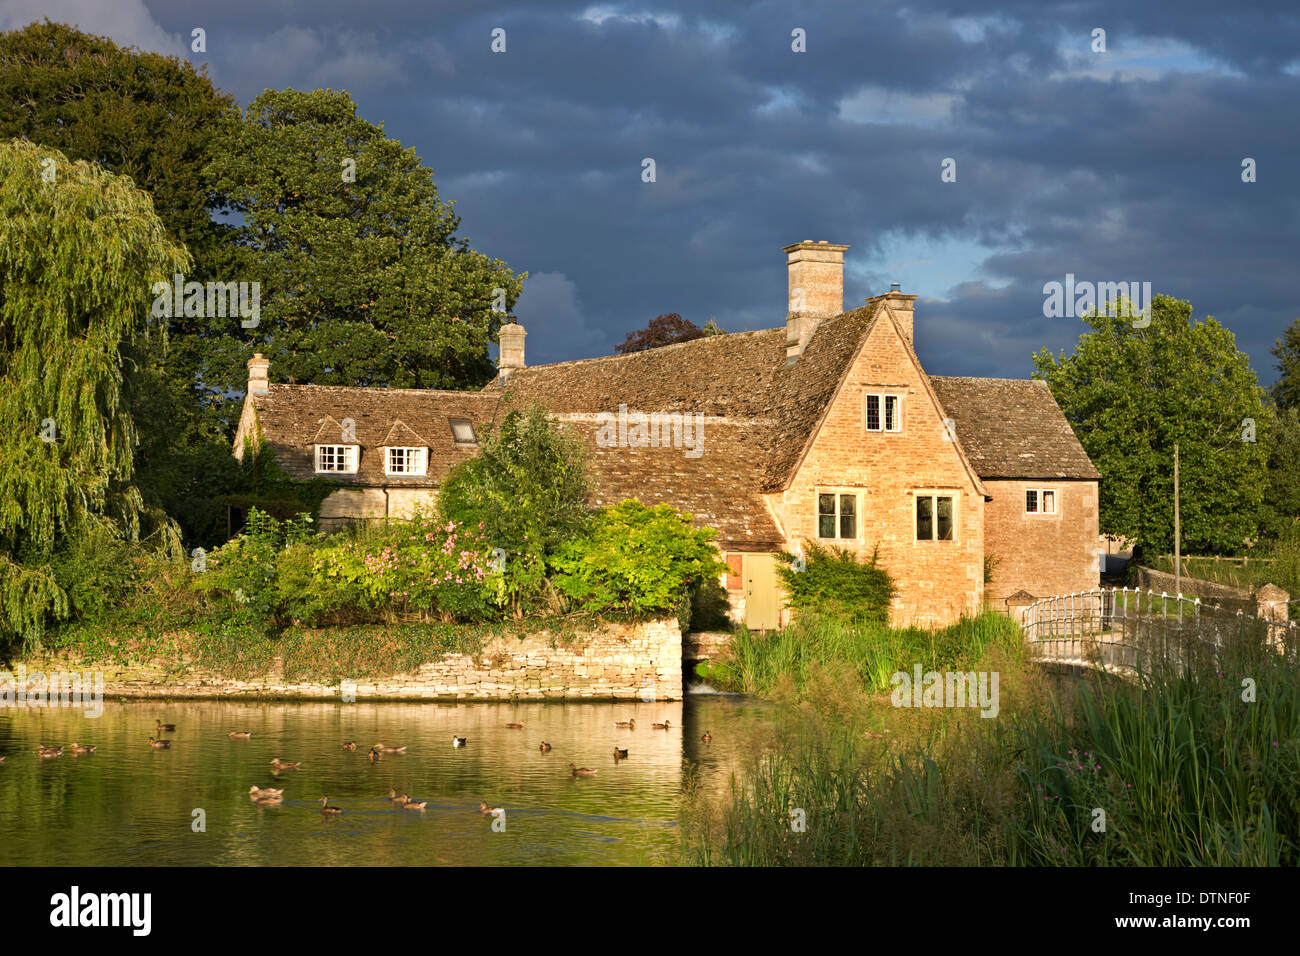 Picturesque Fairford Mill in the Cotswolds, Gloucestershire, England. Summer (July) 2010. Stock Photo